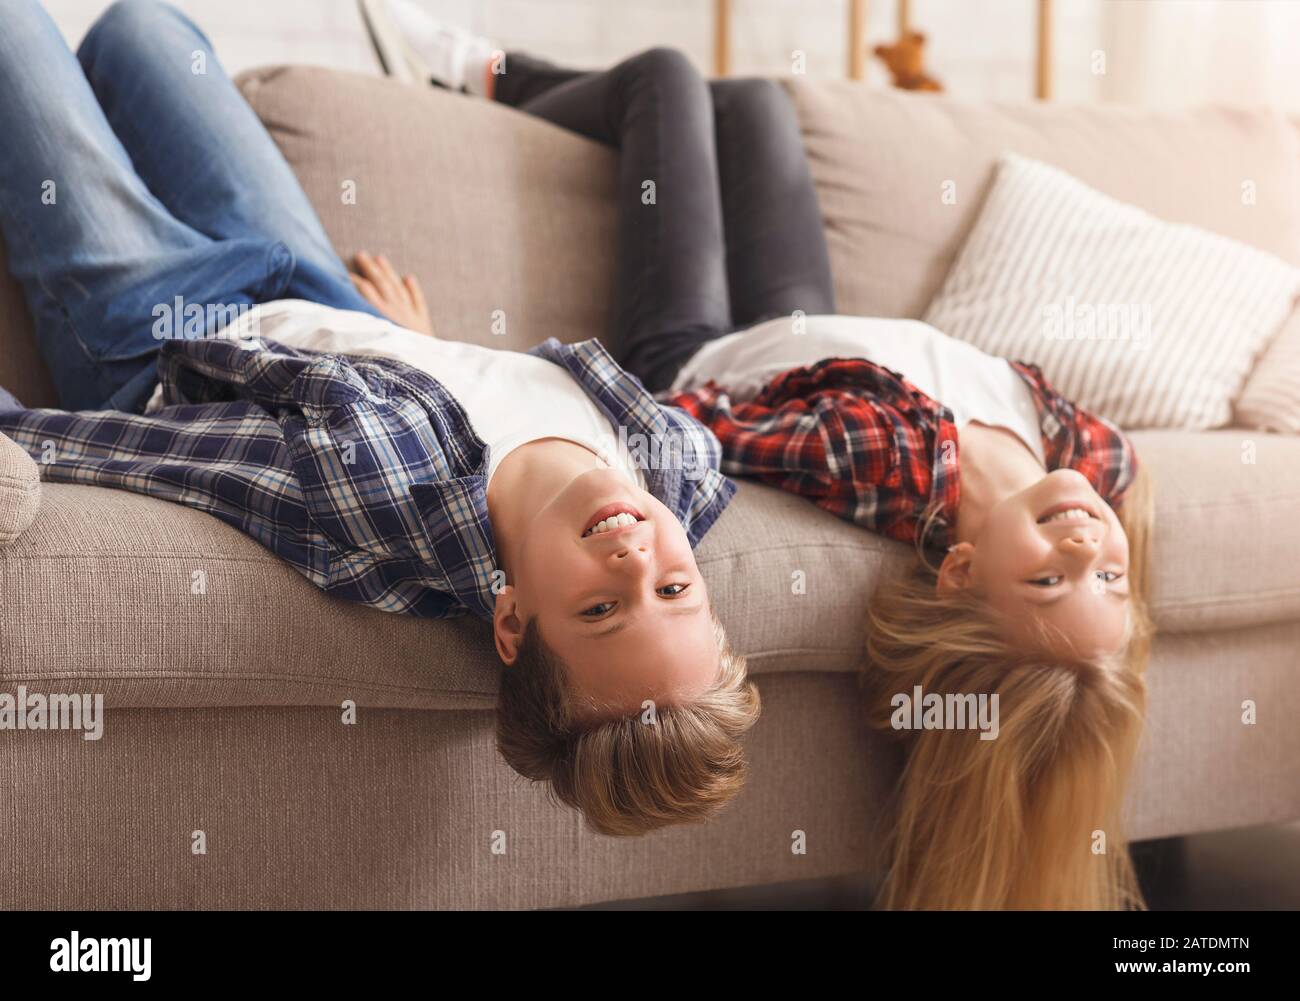 Brother And Sister Sitting On Couch Upside Down At Home Stock Photo